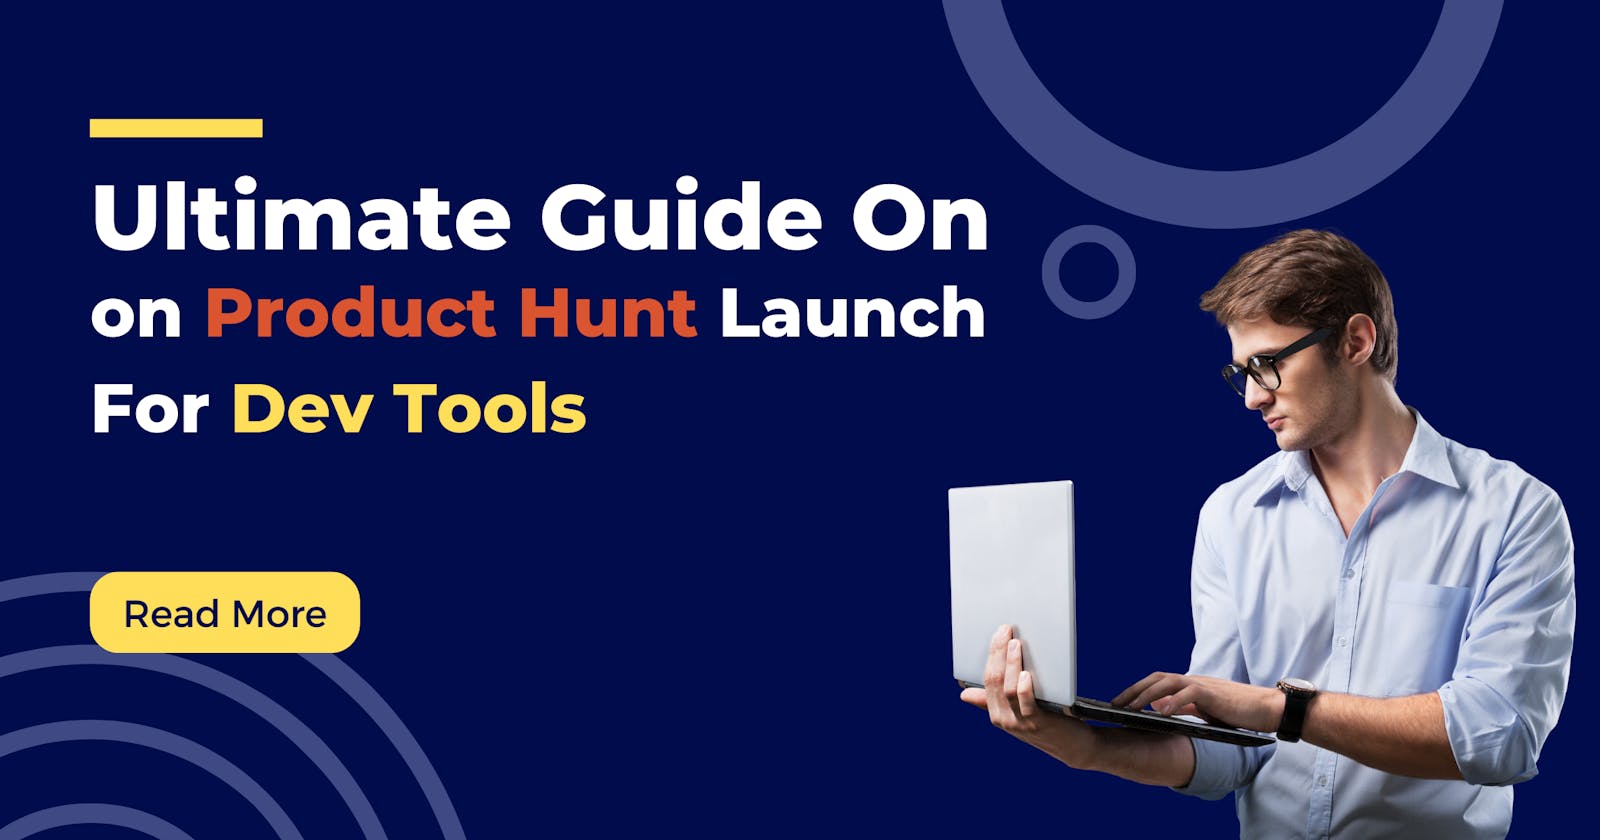 Ultimate Guide on Product Hunt Launch for Dev Tools